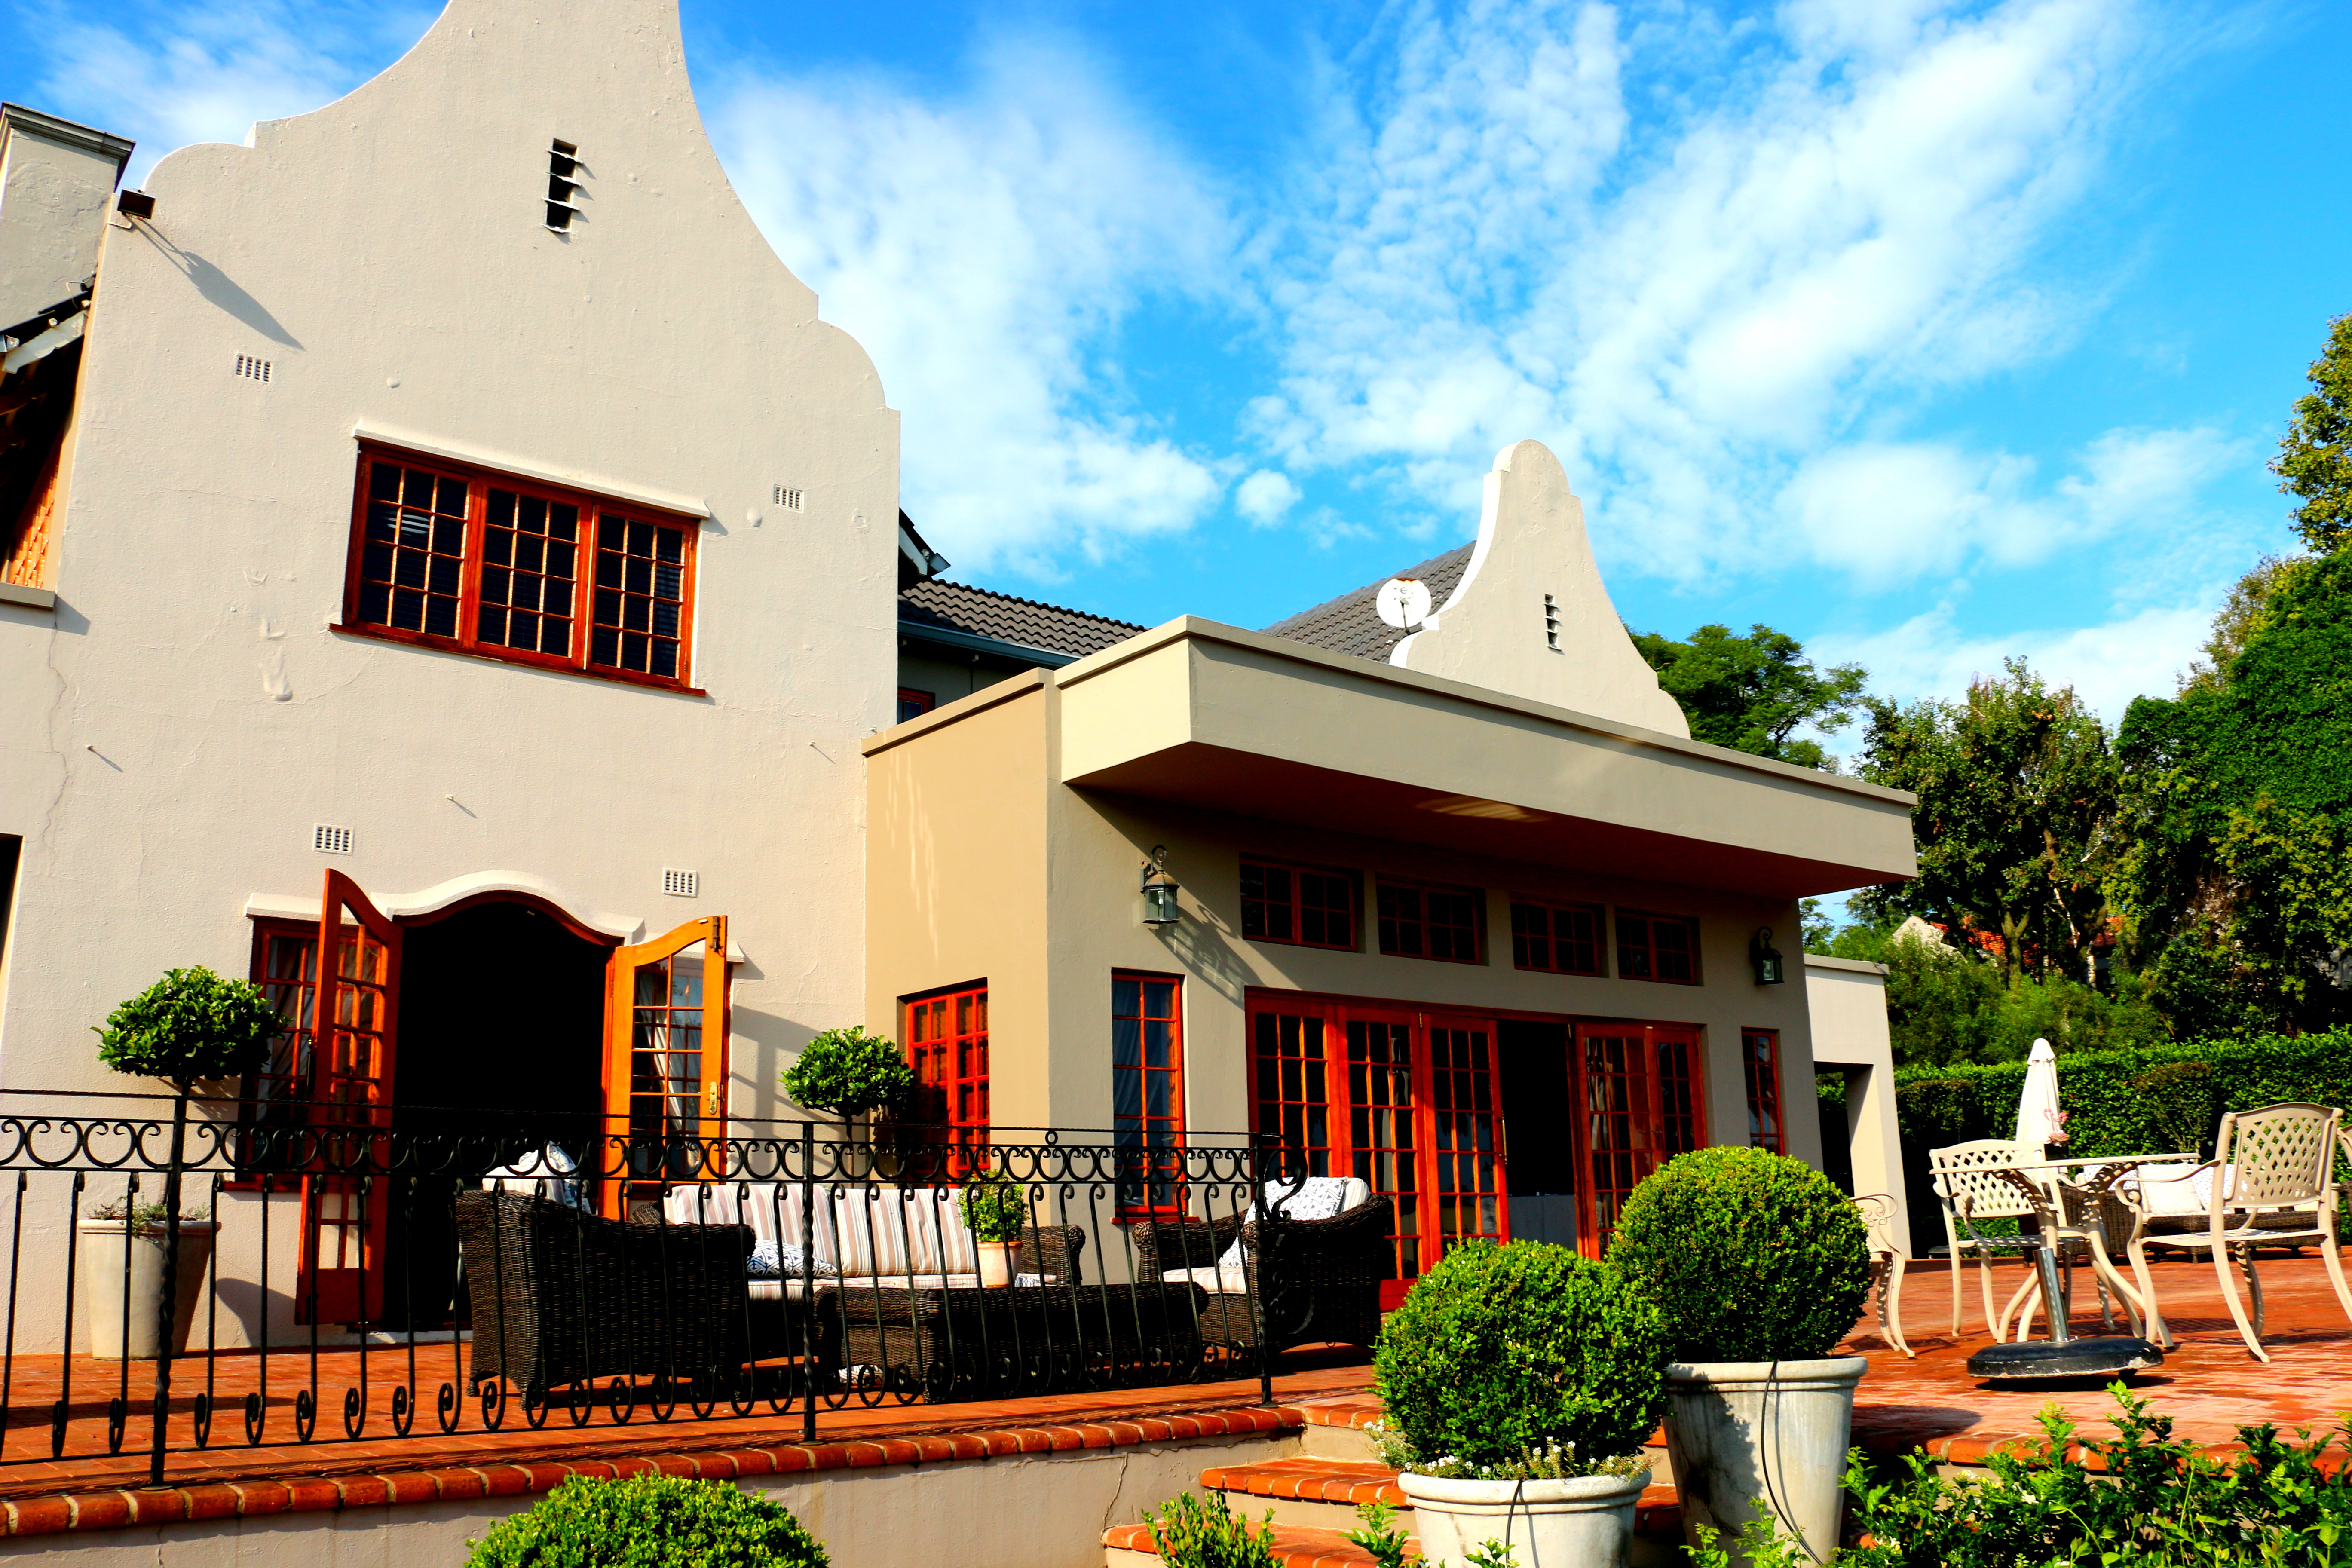 Best Place to Stay in Johannesburg, South Africa - Dating With Passports